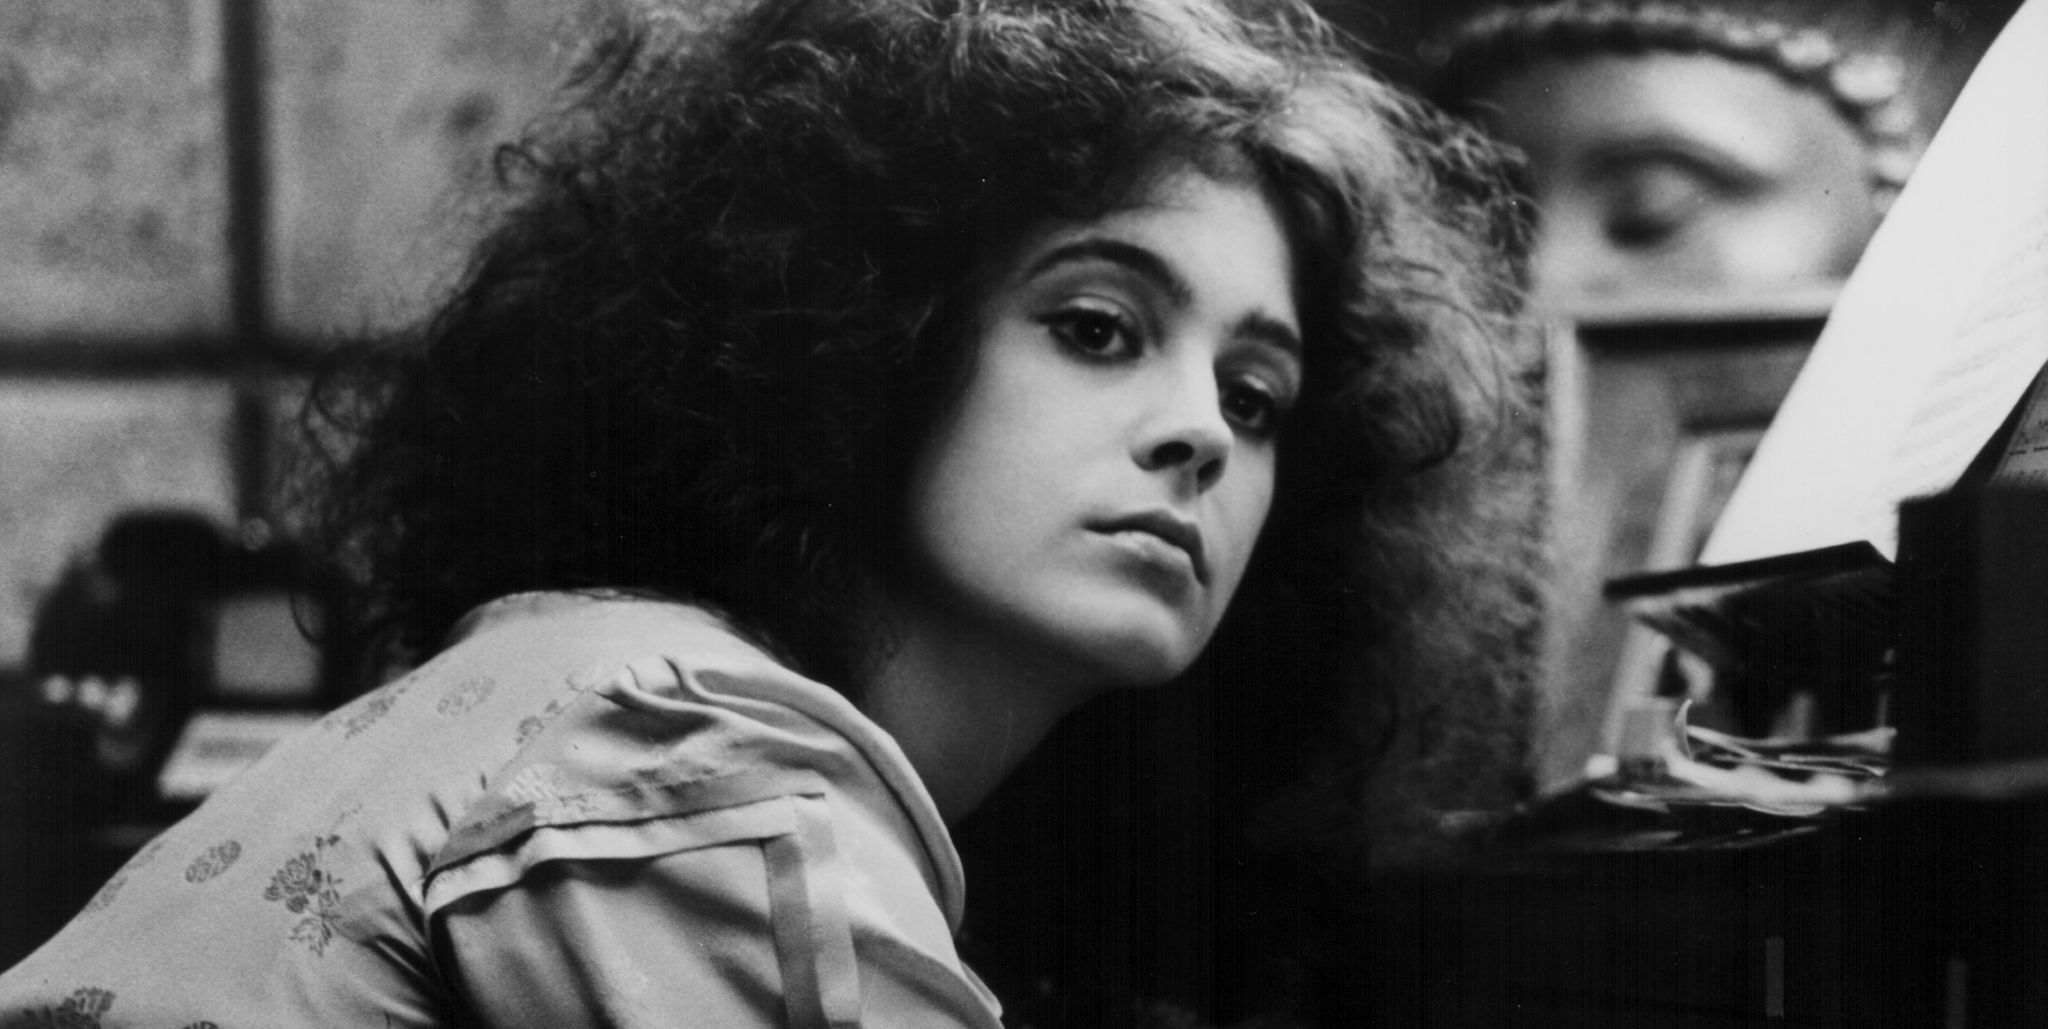 actress sean young in a scene from the movie 'blade runner', 1982 photo by stanley bielecki movie collectiongetty images